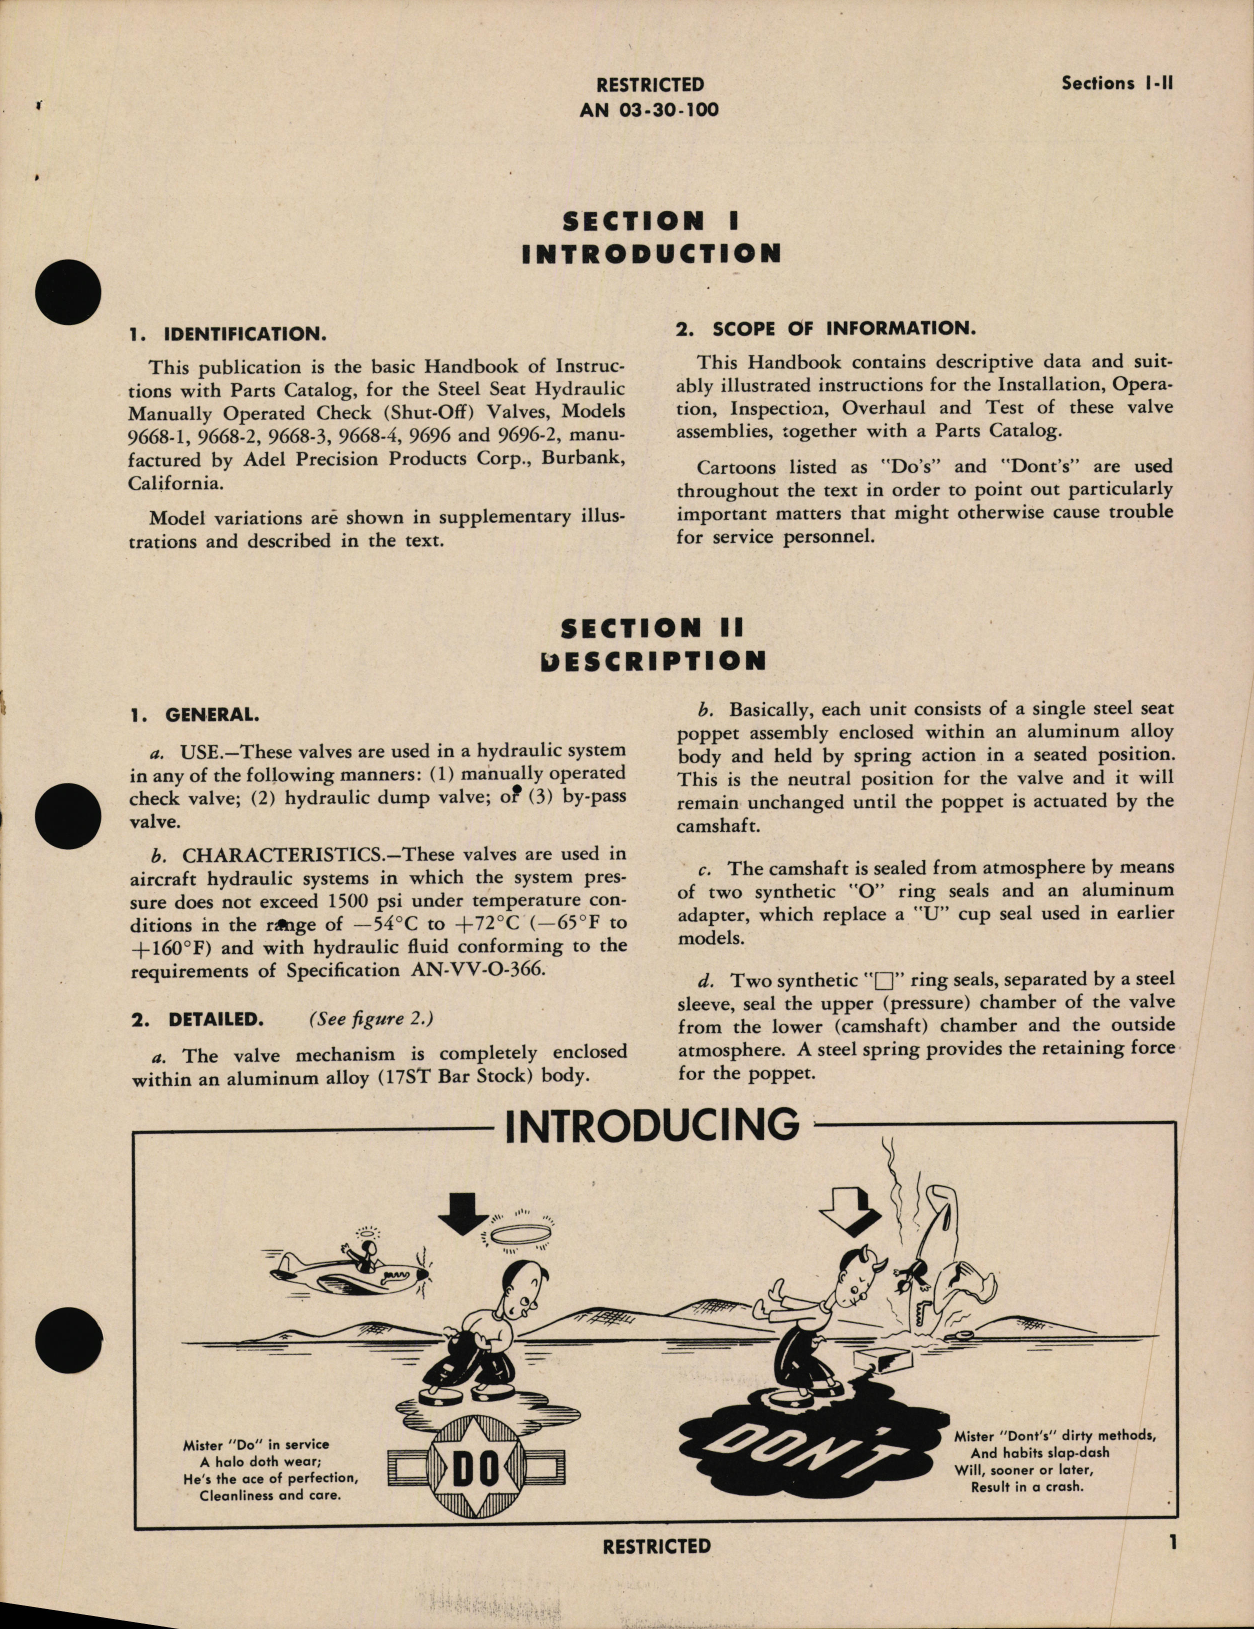 Sample page 5 from AirCorps Library document: Handbook of Instructions with Parts Catalog for Steel Seat Hydraulic Manually Operated Check (Shut-Off) Valves 